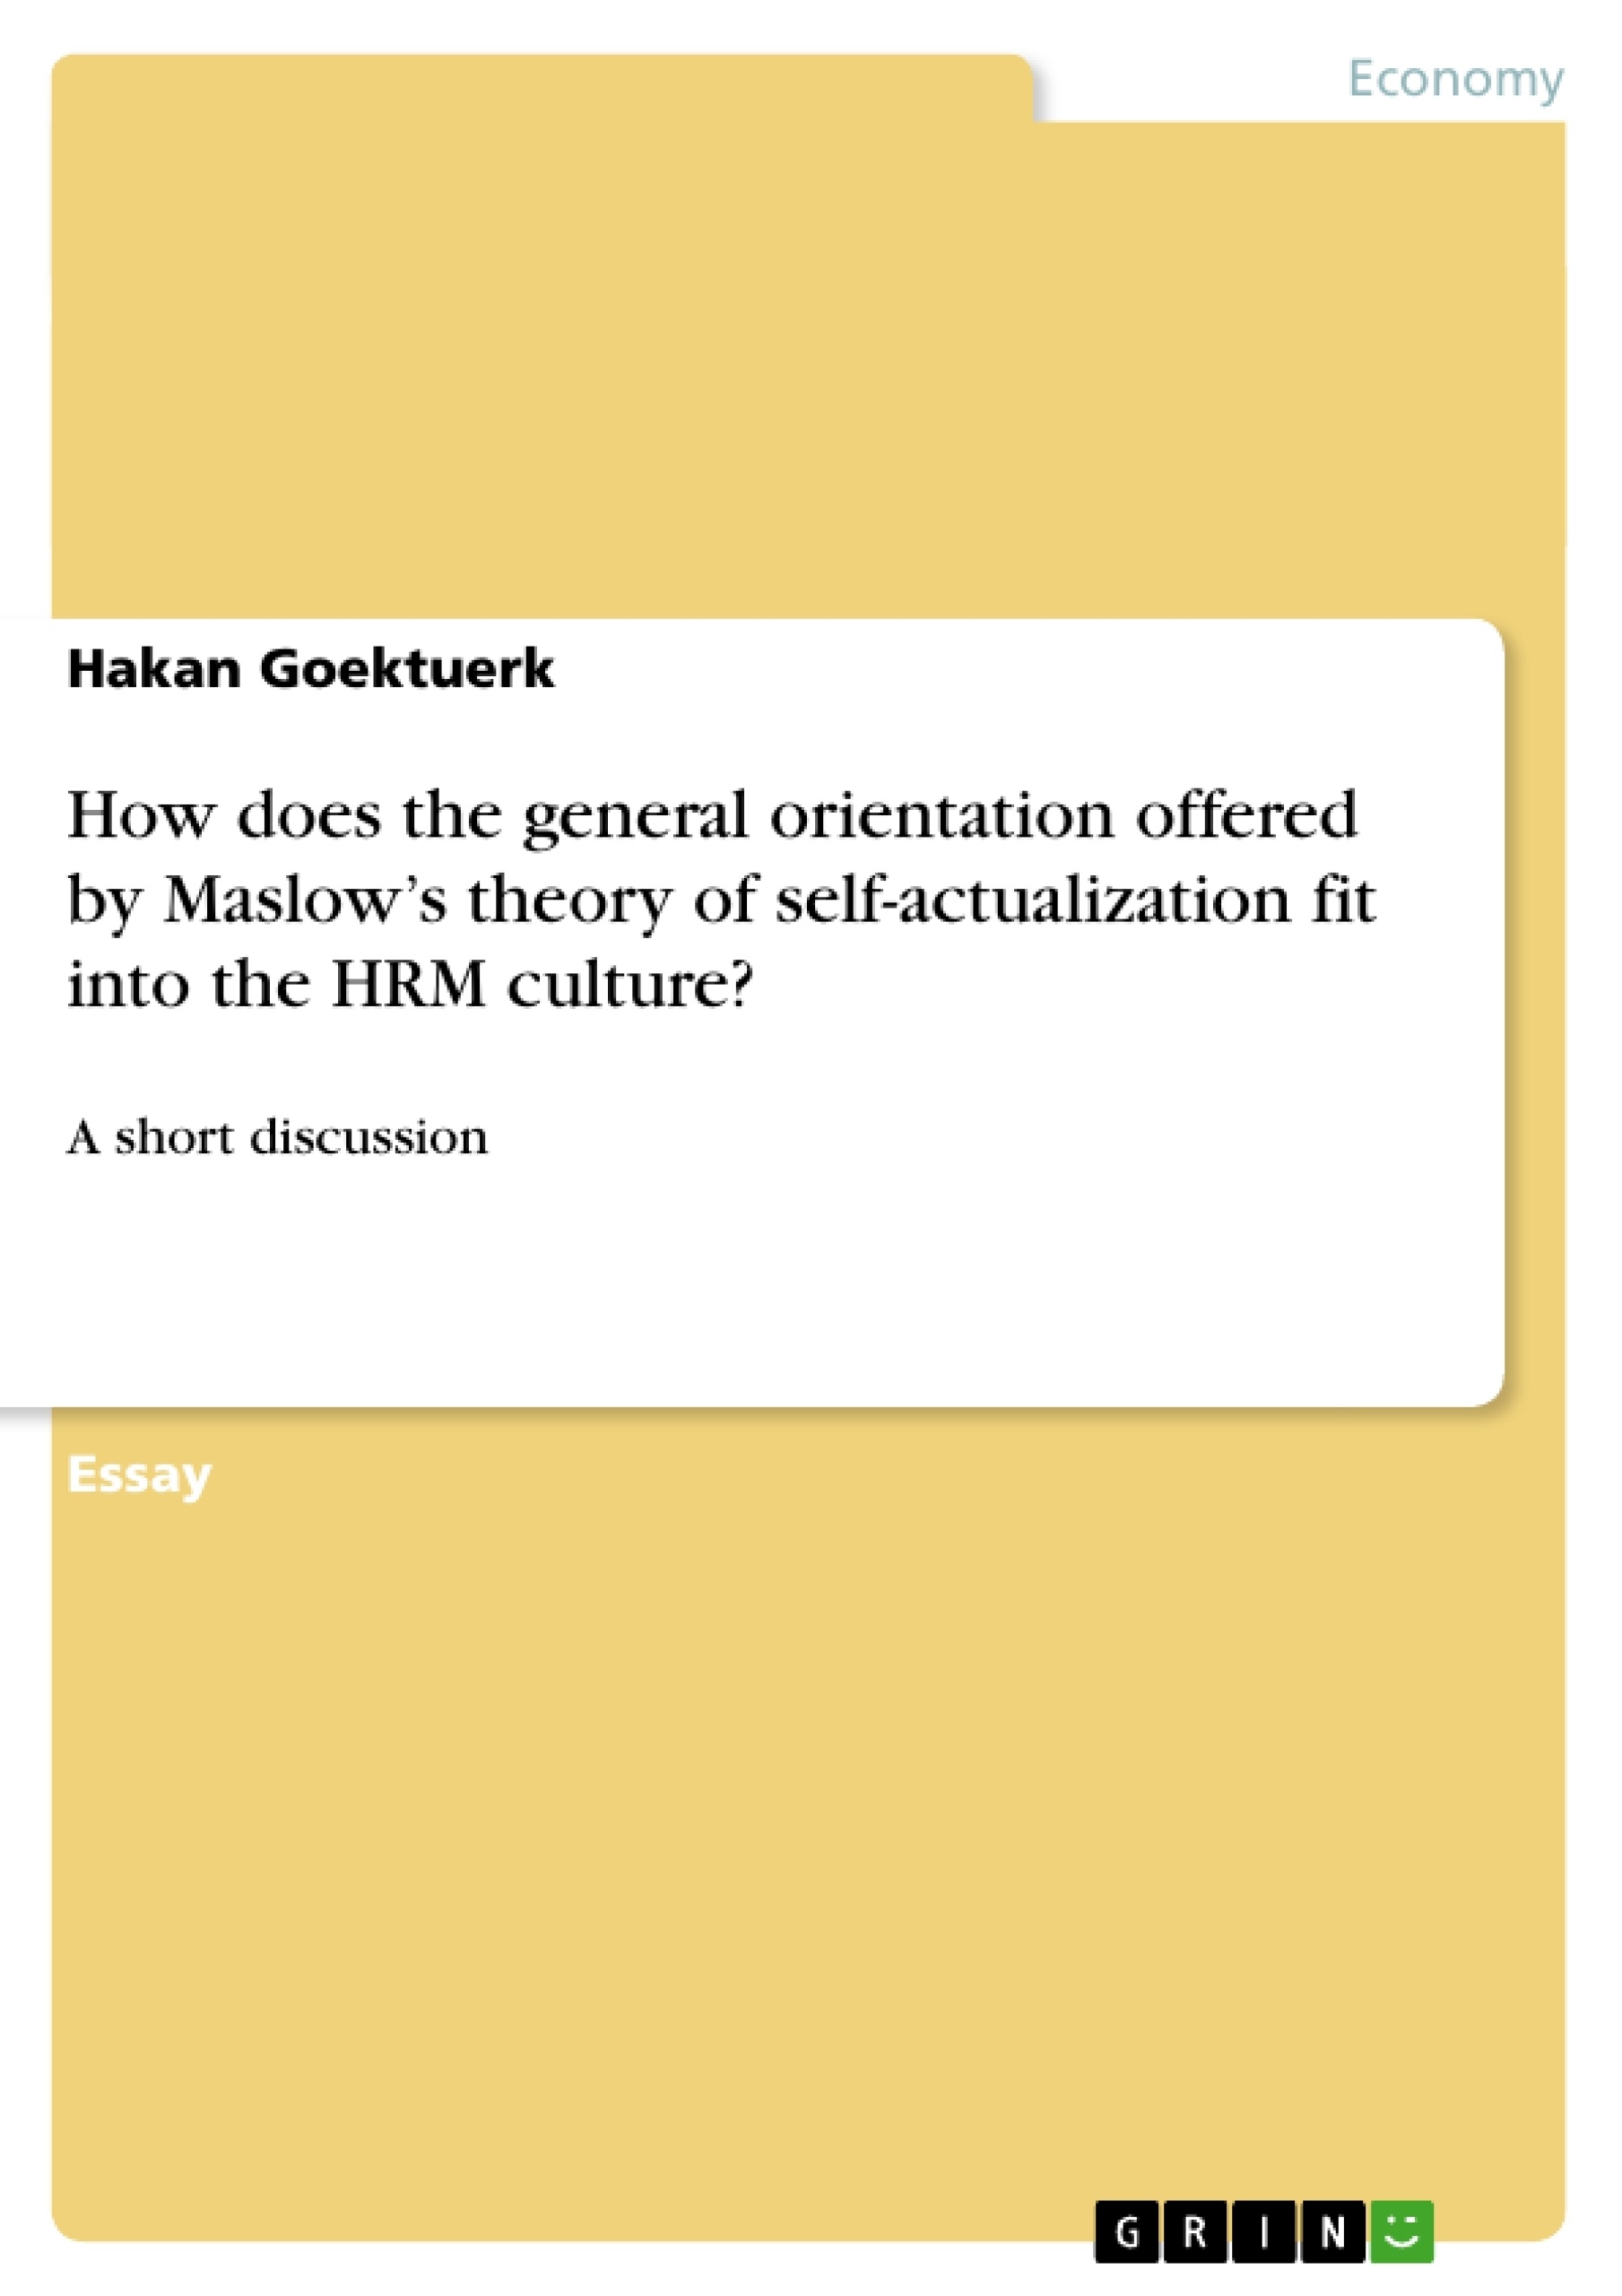 Título: How does the general orientation offered by Maslow’s theory of self-actualization fit into the HRM culture?